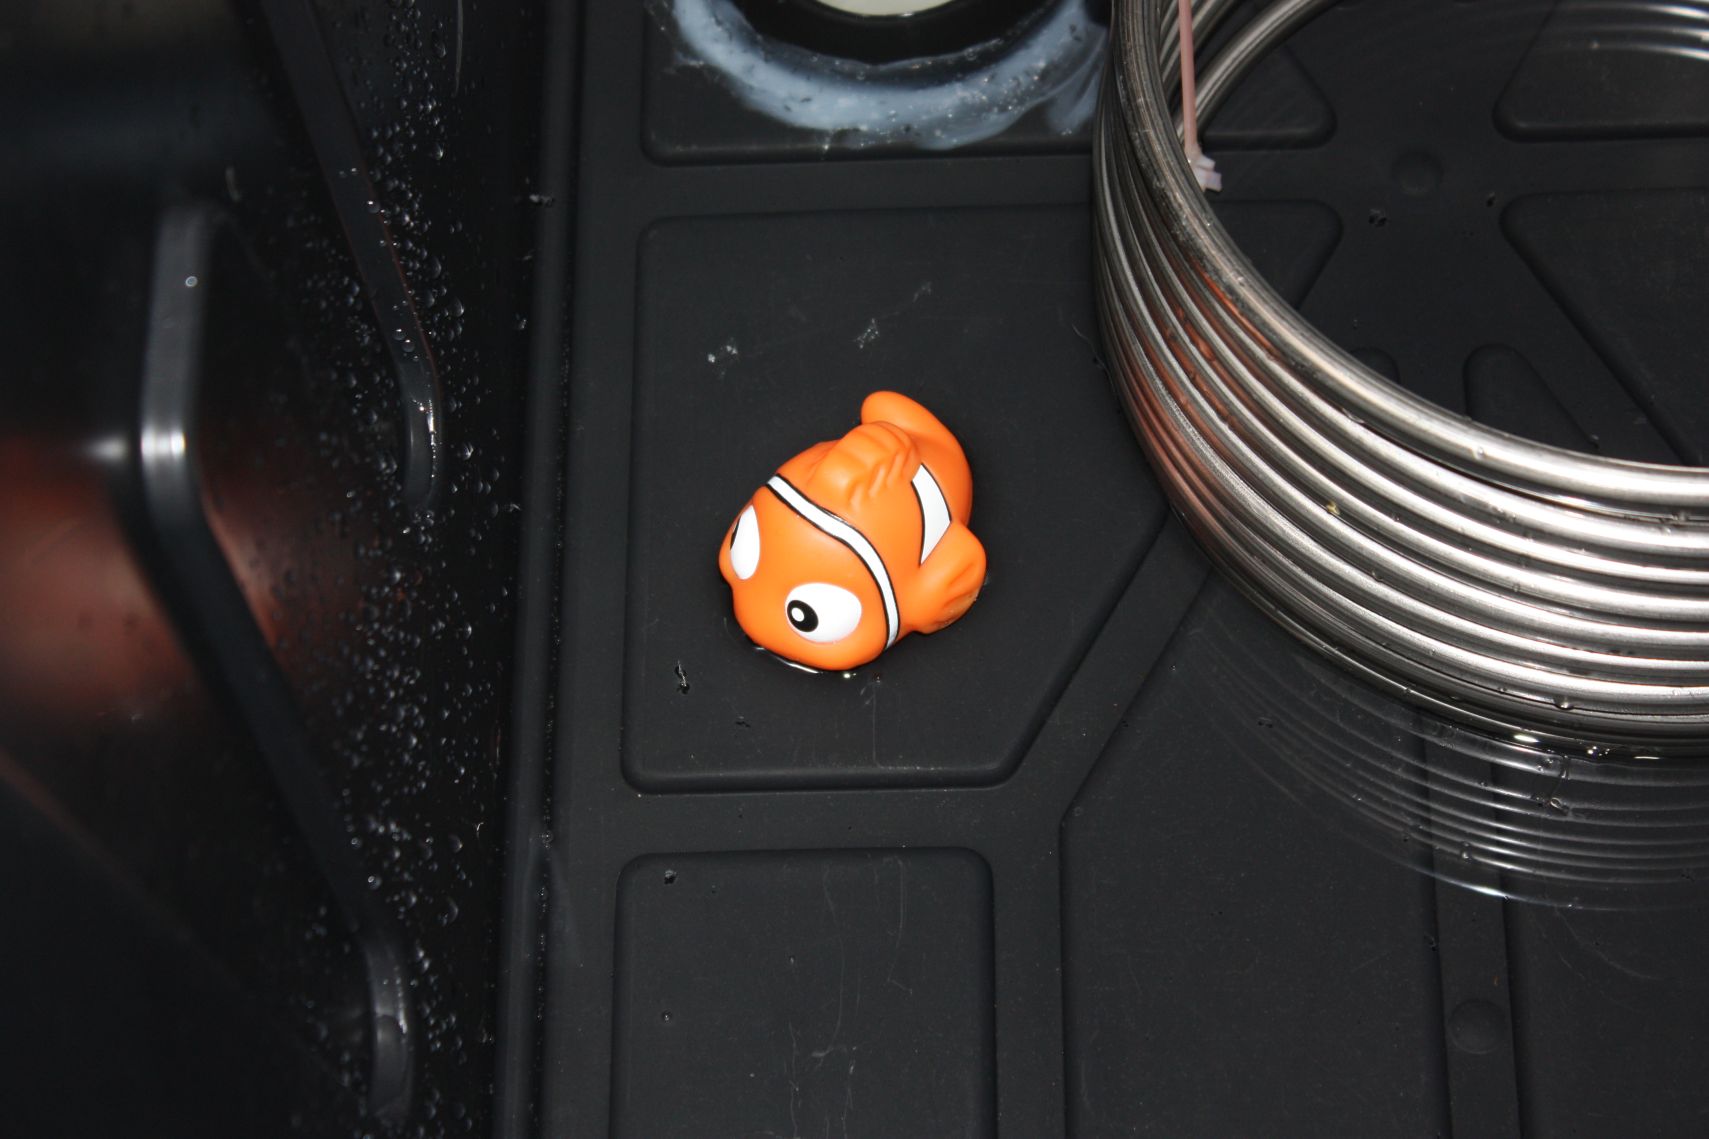 if nemo can swim, it's good enough for me. no leaks, no drips, no problem!